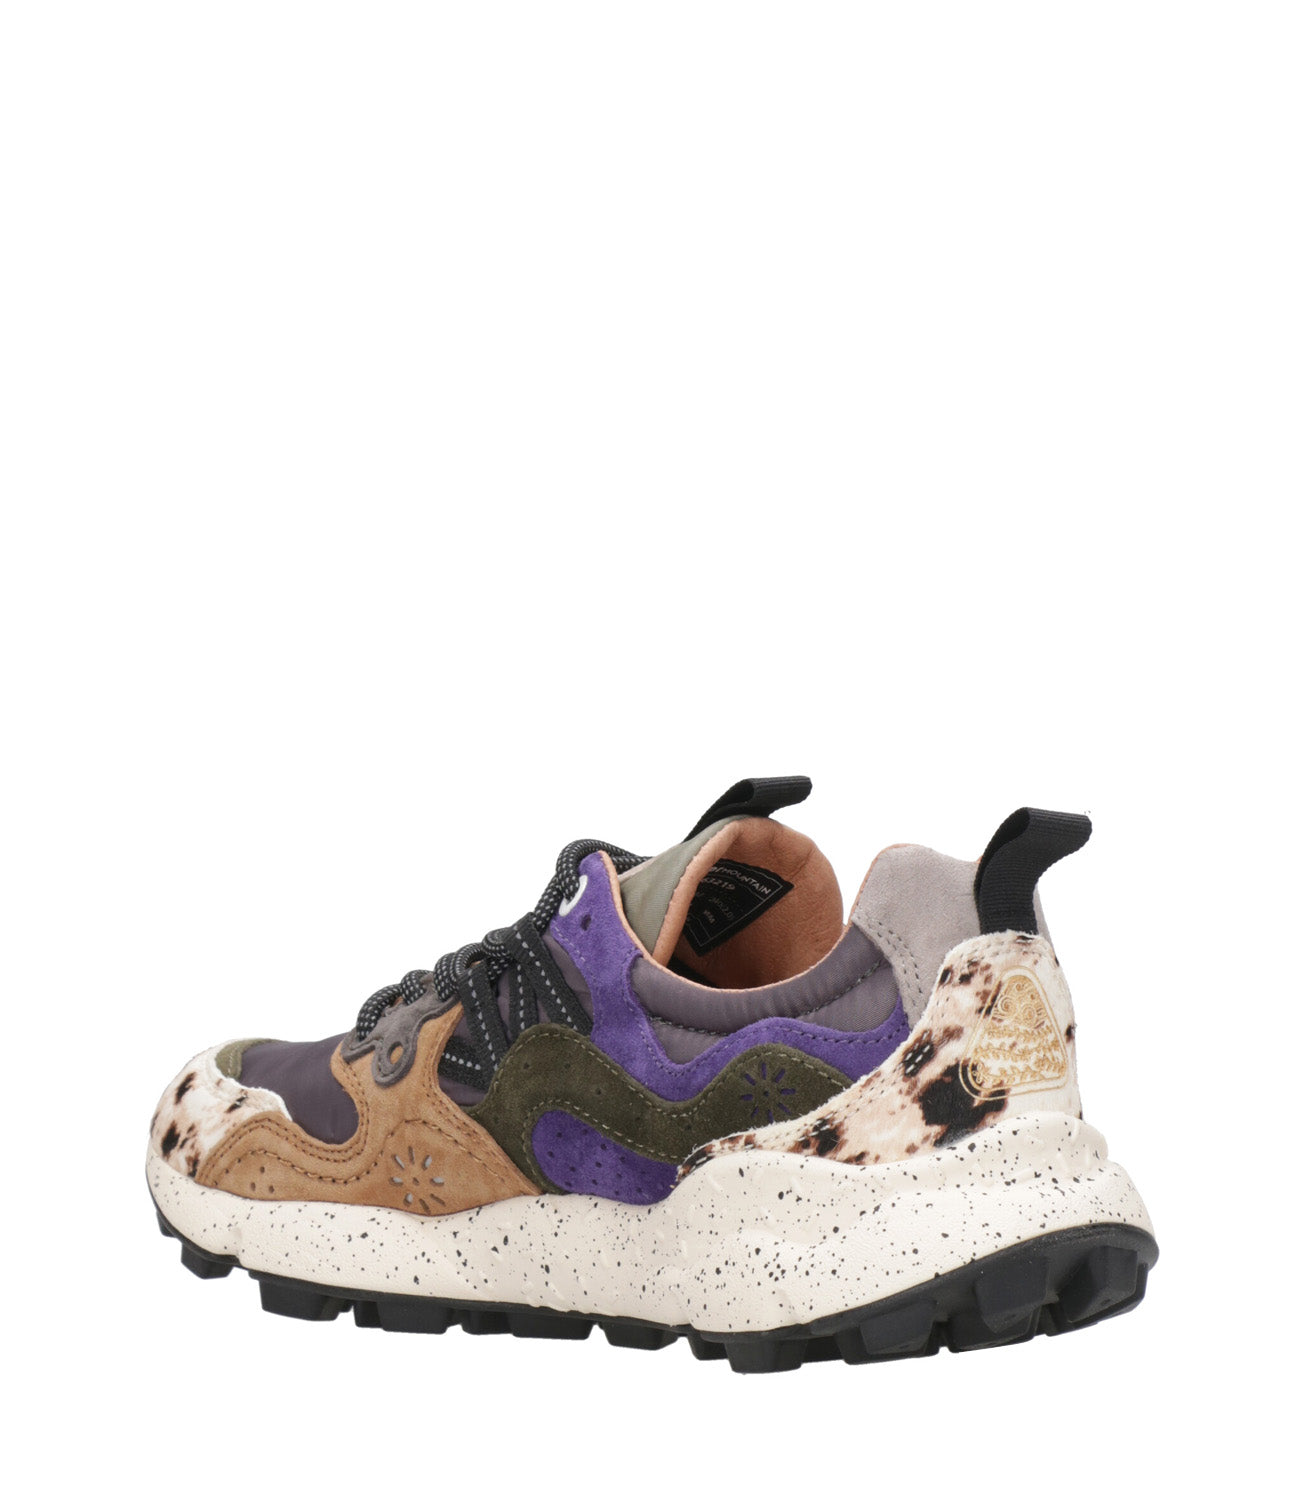 Flower Montain | Yamano Multicolor and Gray Sneakers